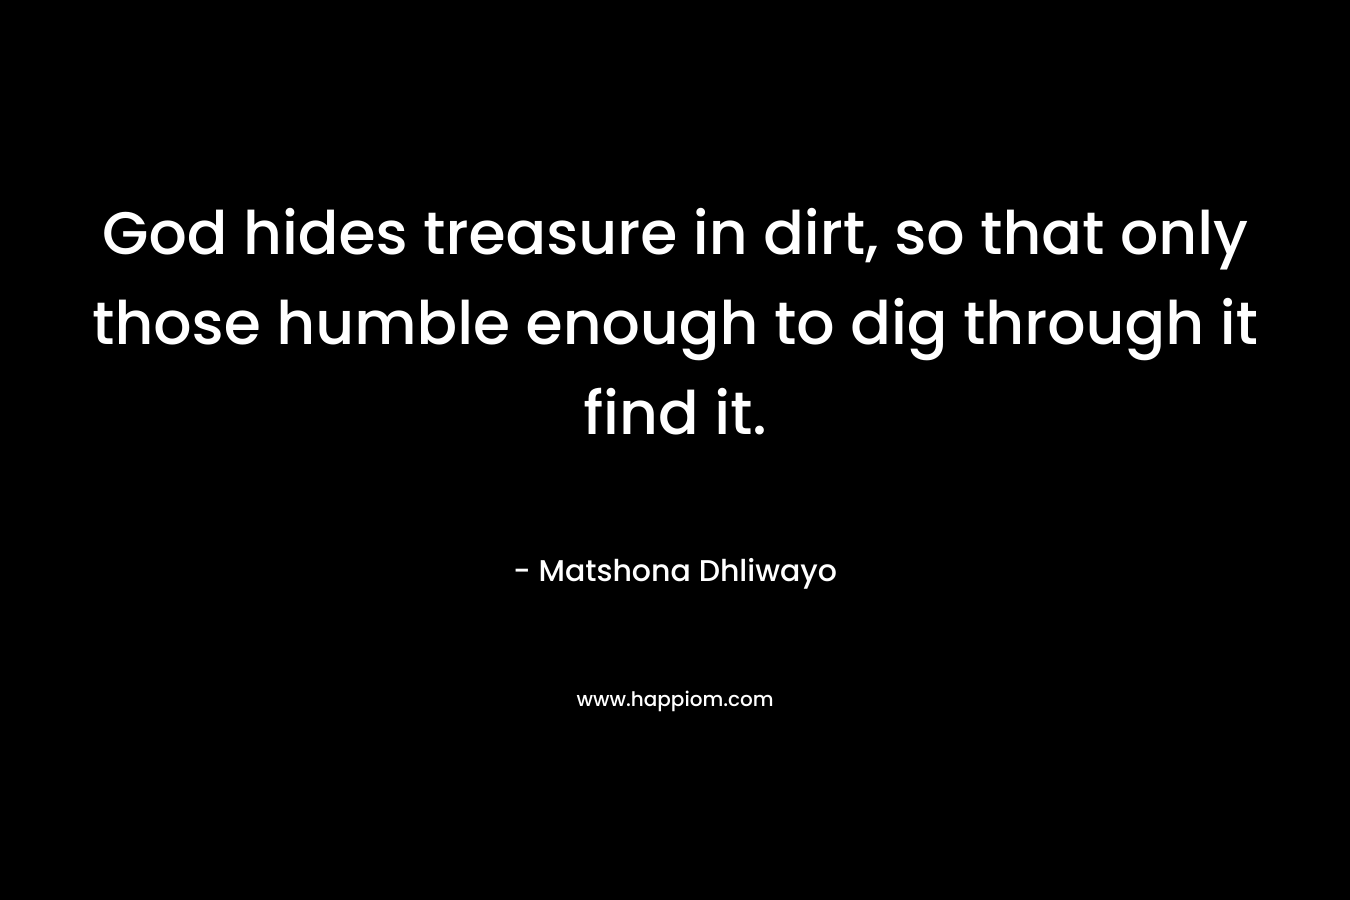 God hides treasure in dirt, so that only those humble enough to dig through it find it.